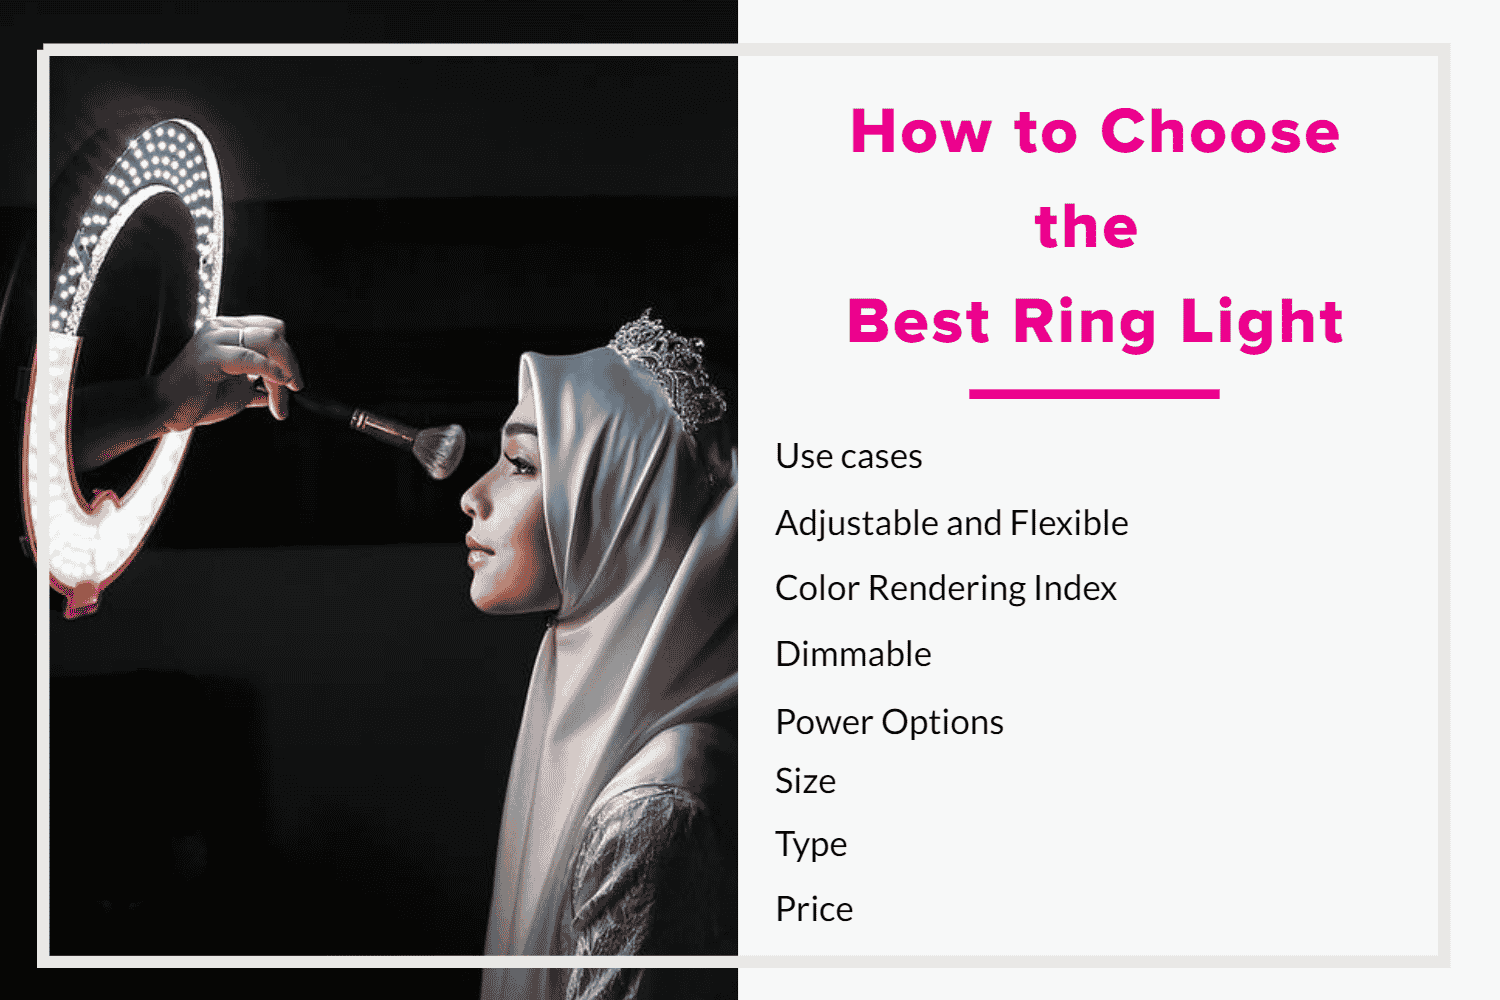 How to Choose the Best Ring Light